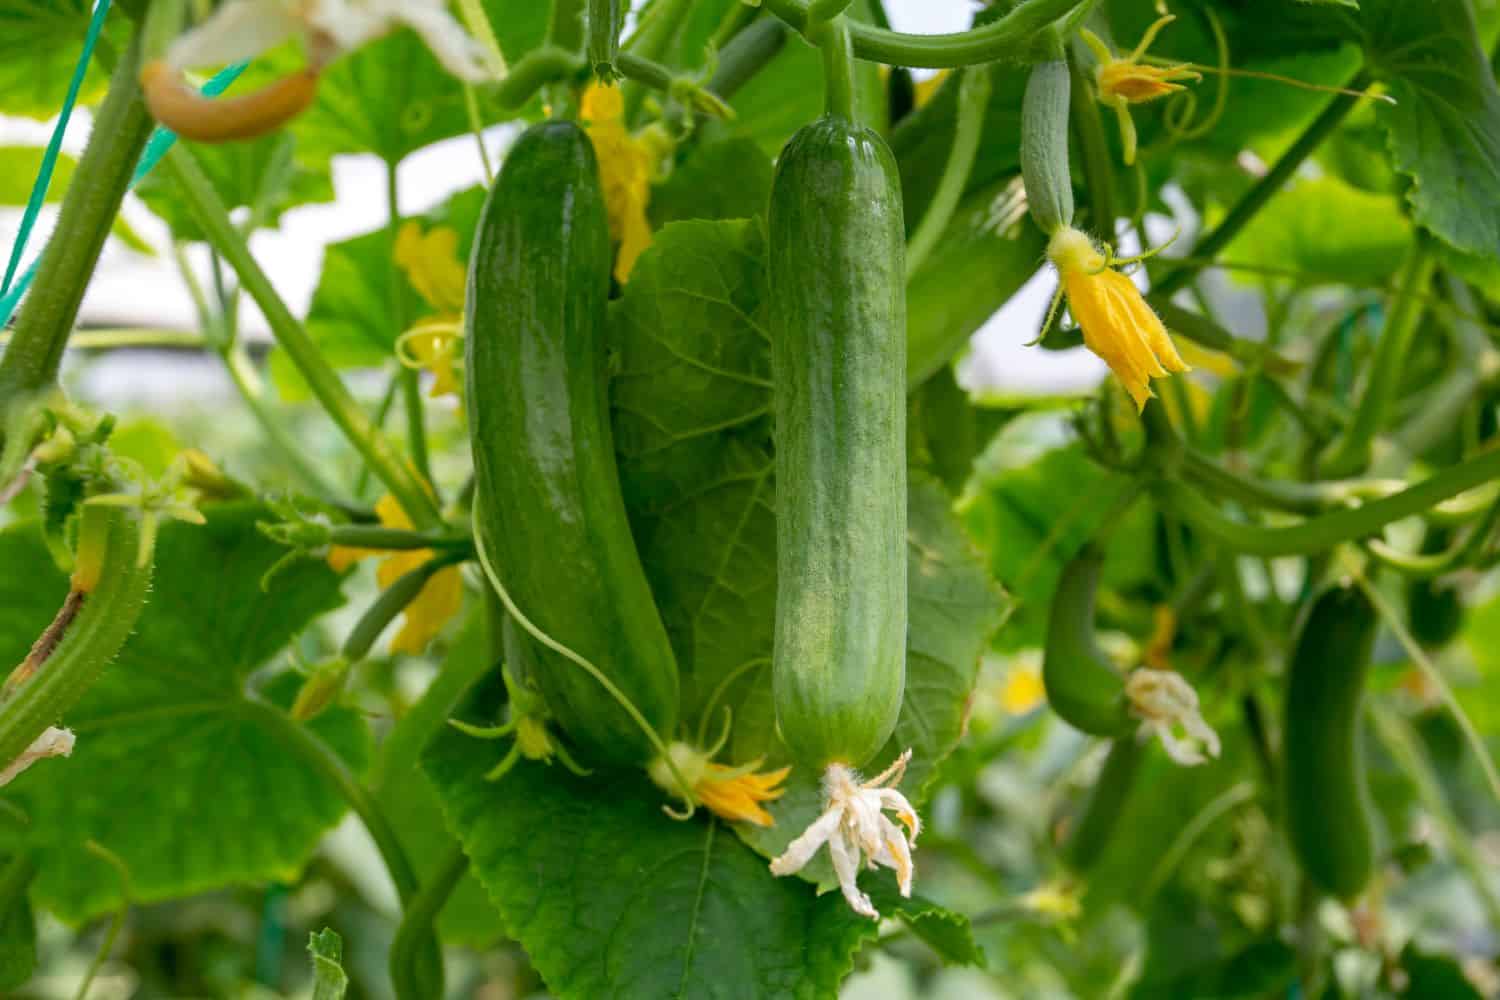 How to Grow Cucumbers, Trellis Cucumber Plants, and Treat Cucumber Diseases